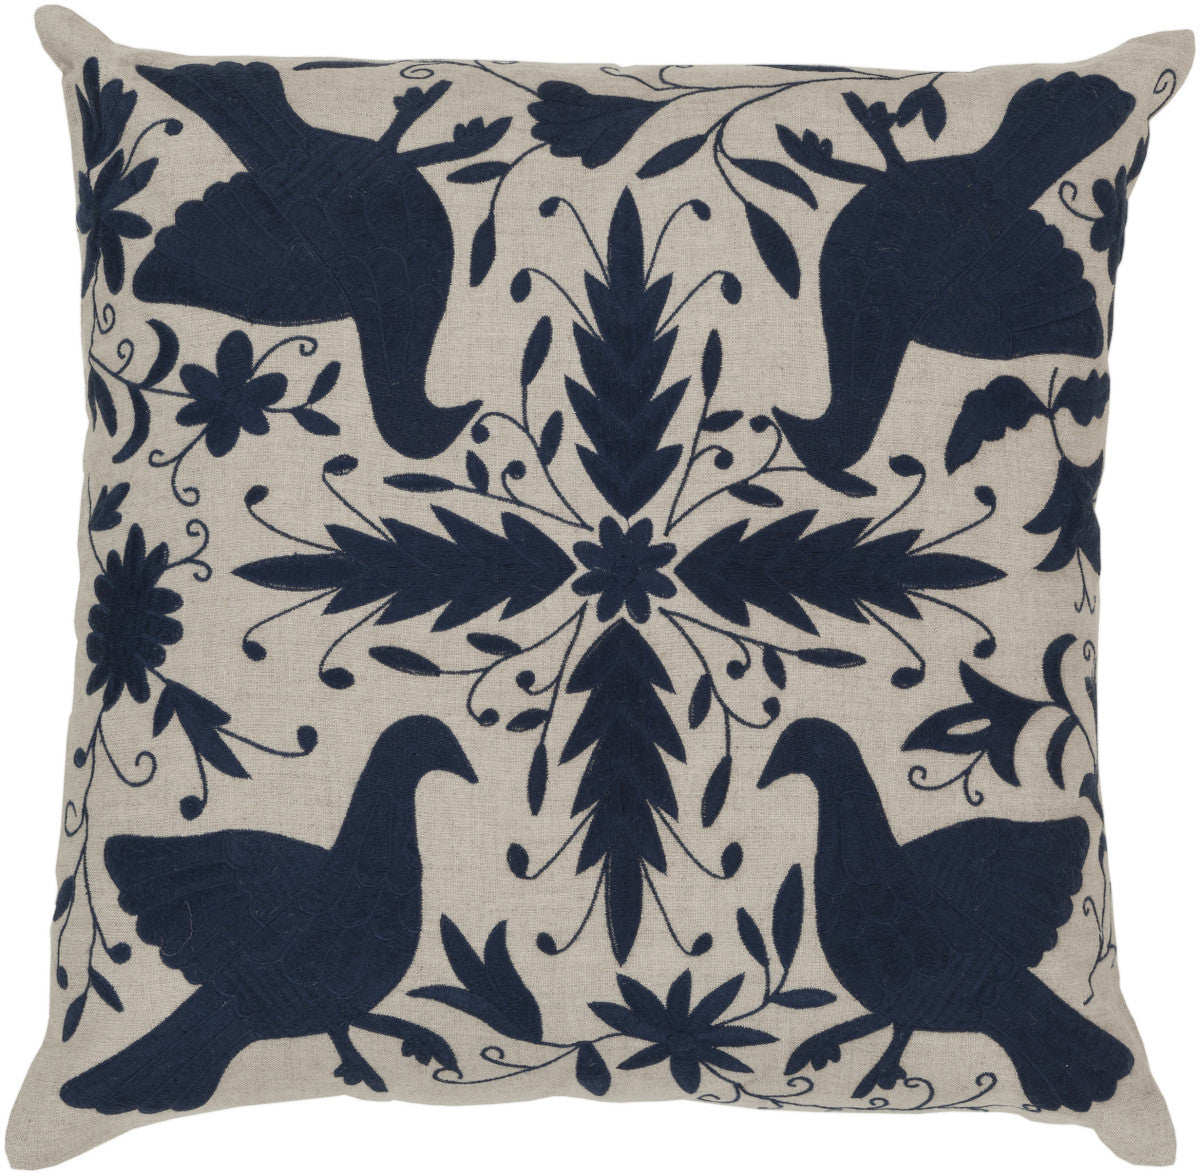 Surya Otomi Delicate Doves LD-020 Pillow by Beth Lacefield